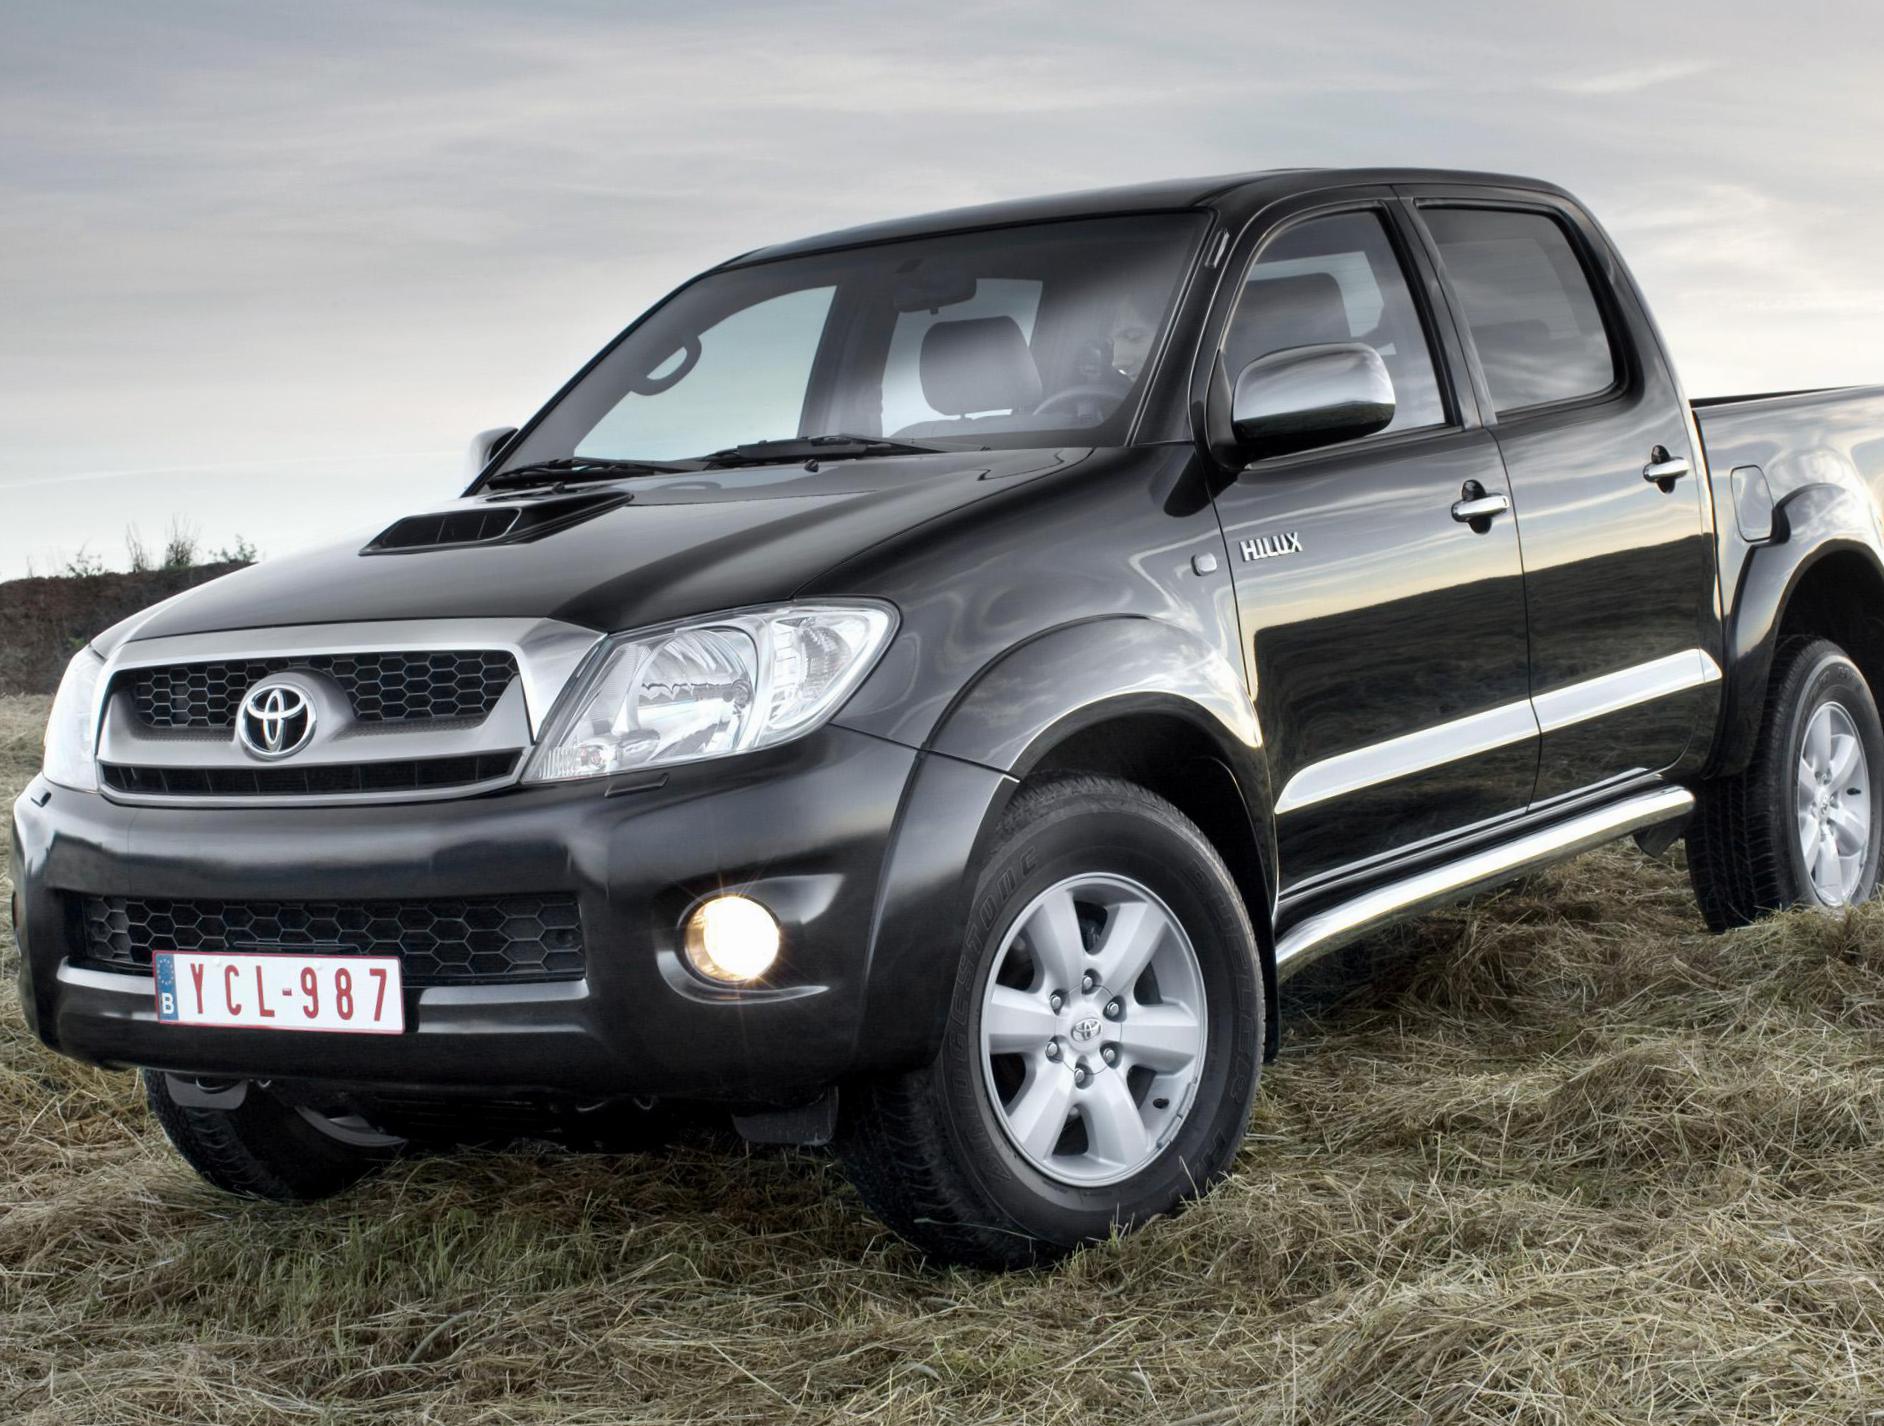 Toyota Hilux Double Cab review 2013